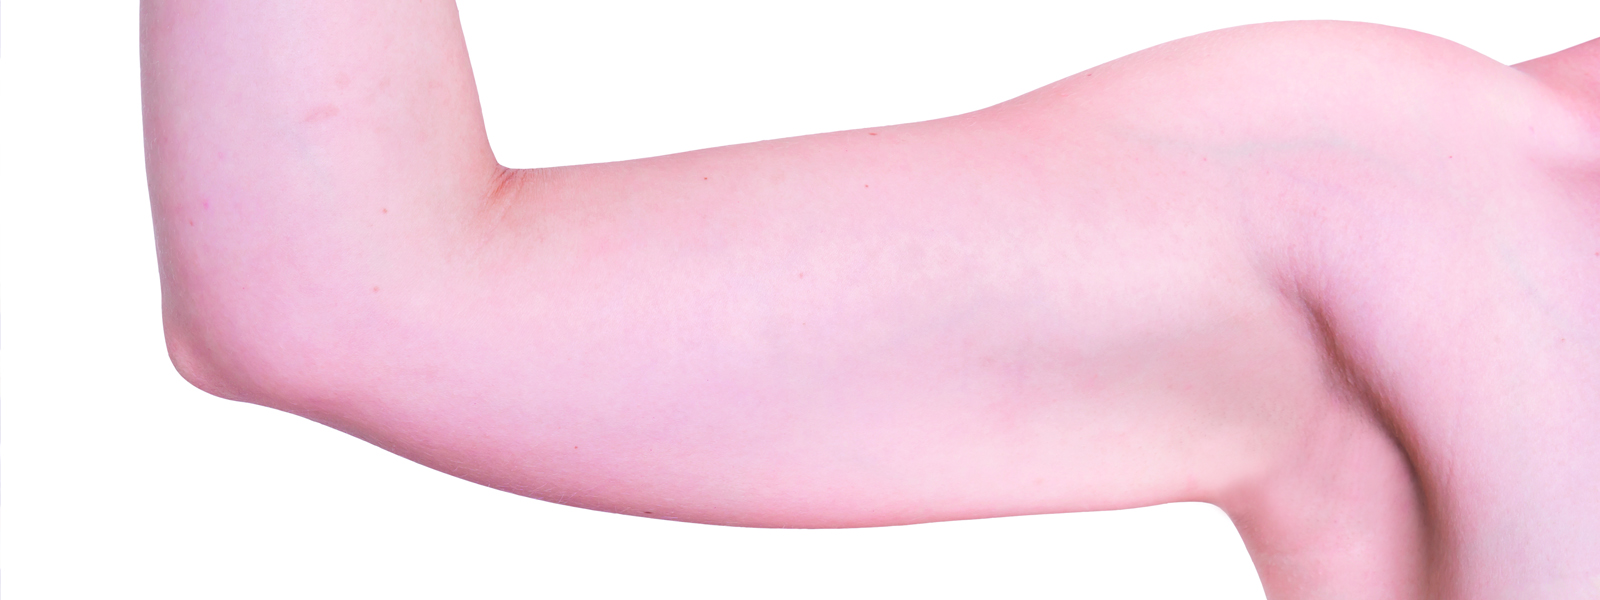 Photo of a person's bicep